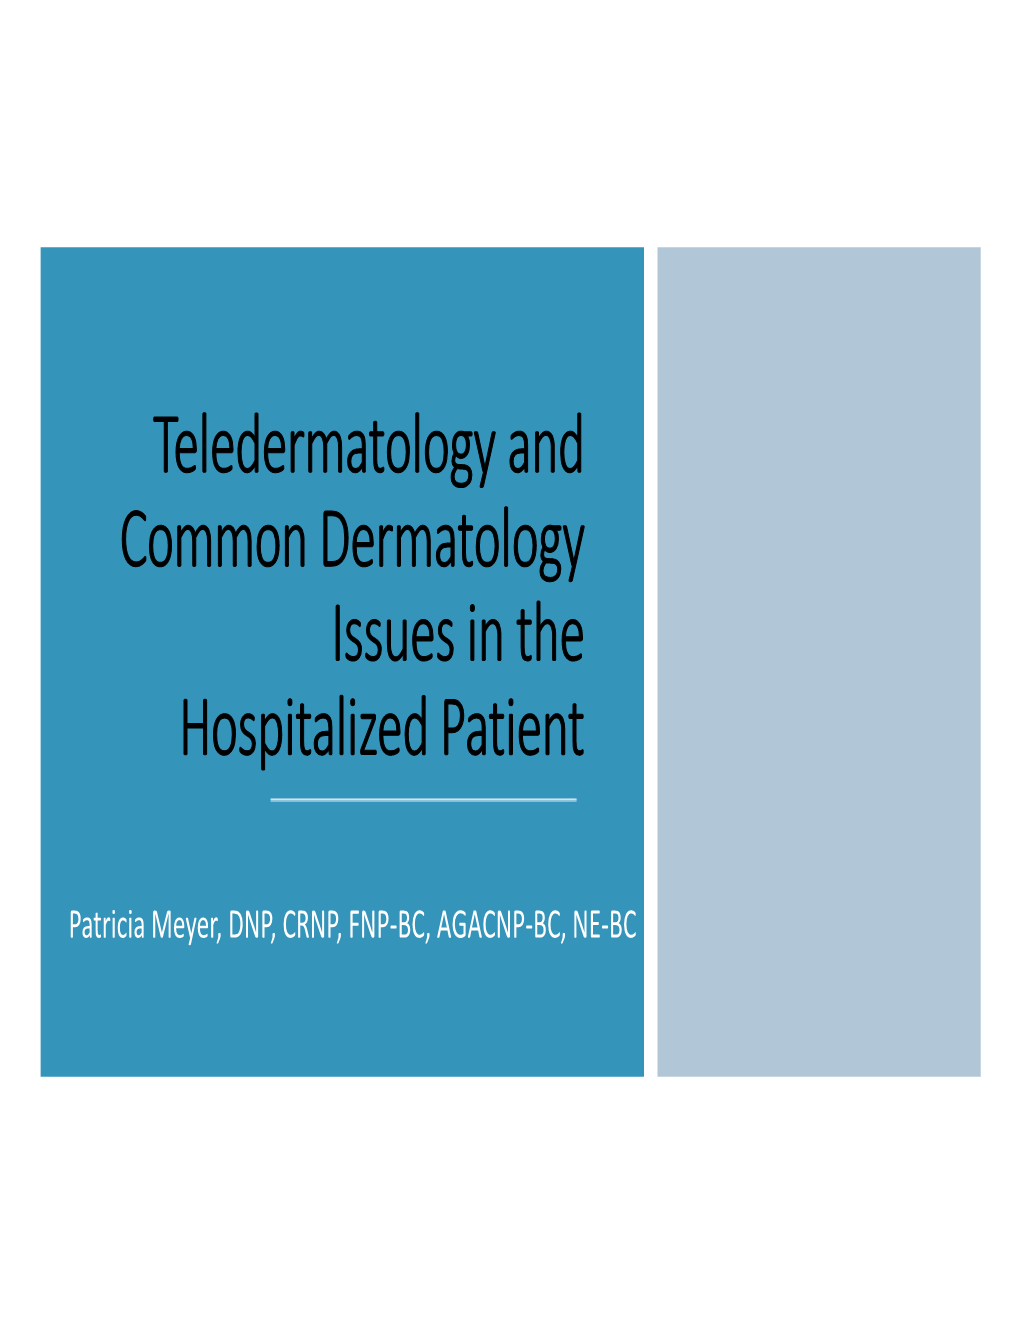 Teledermatology and Common Dermatology Issues in the Hospitalized Patient